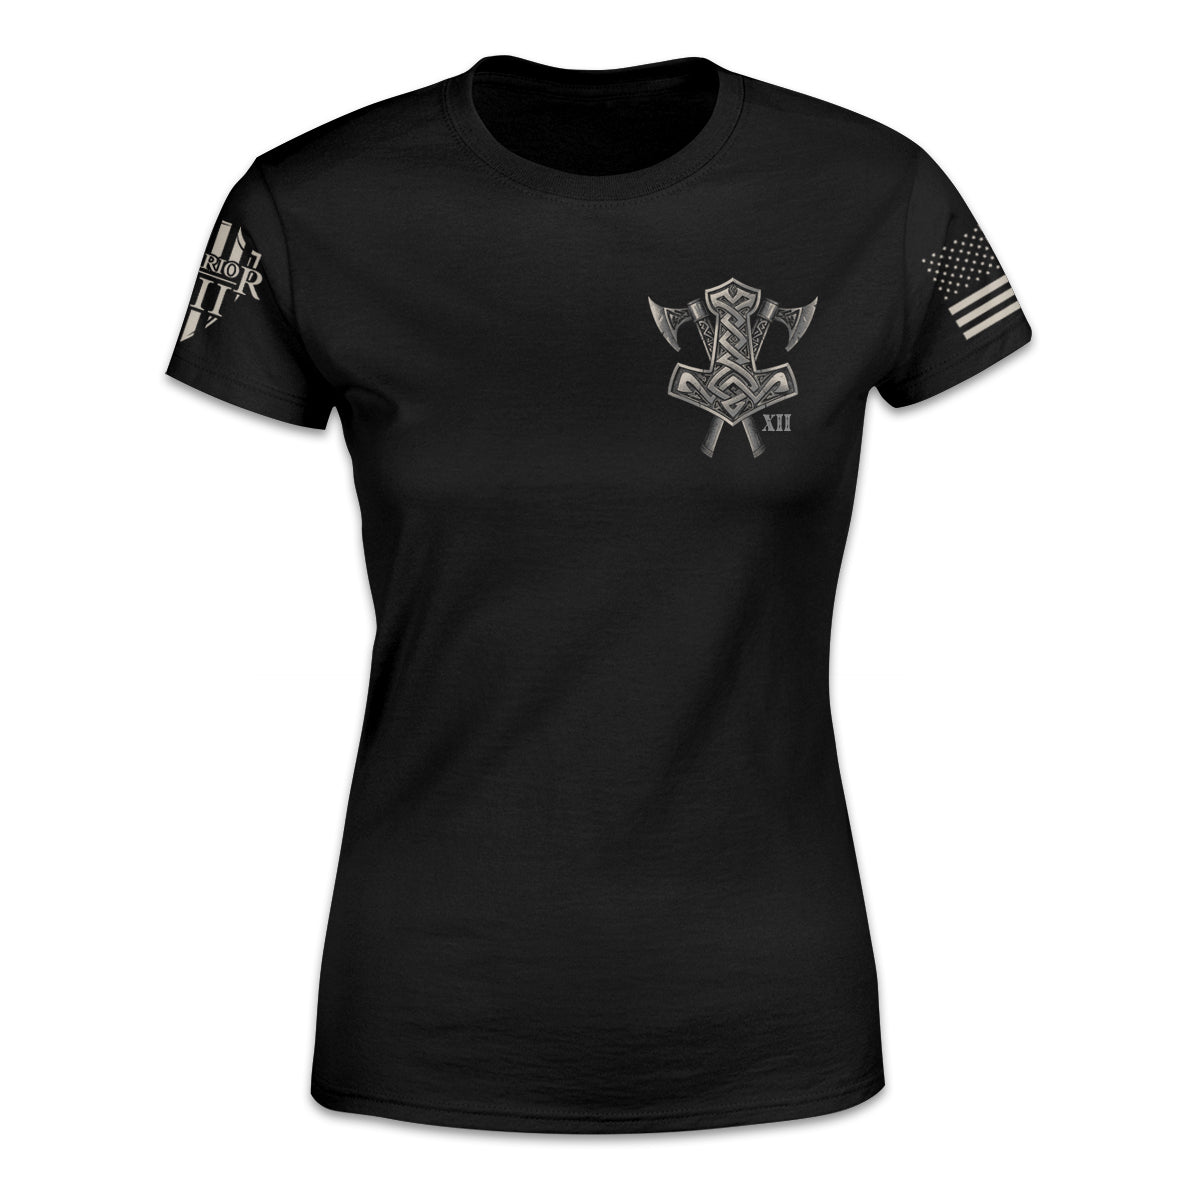 A black women's relaxed fit shirt with Viking weapons printed on the front left chest.